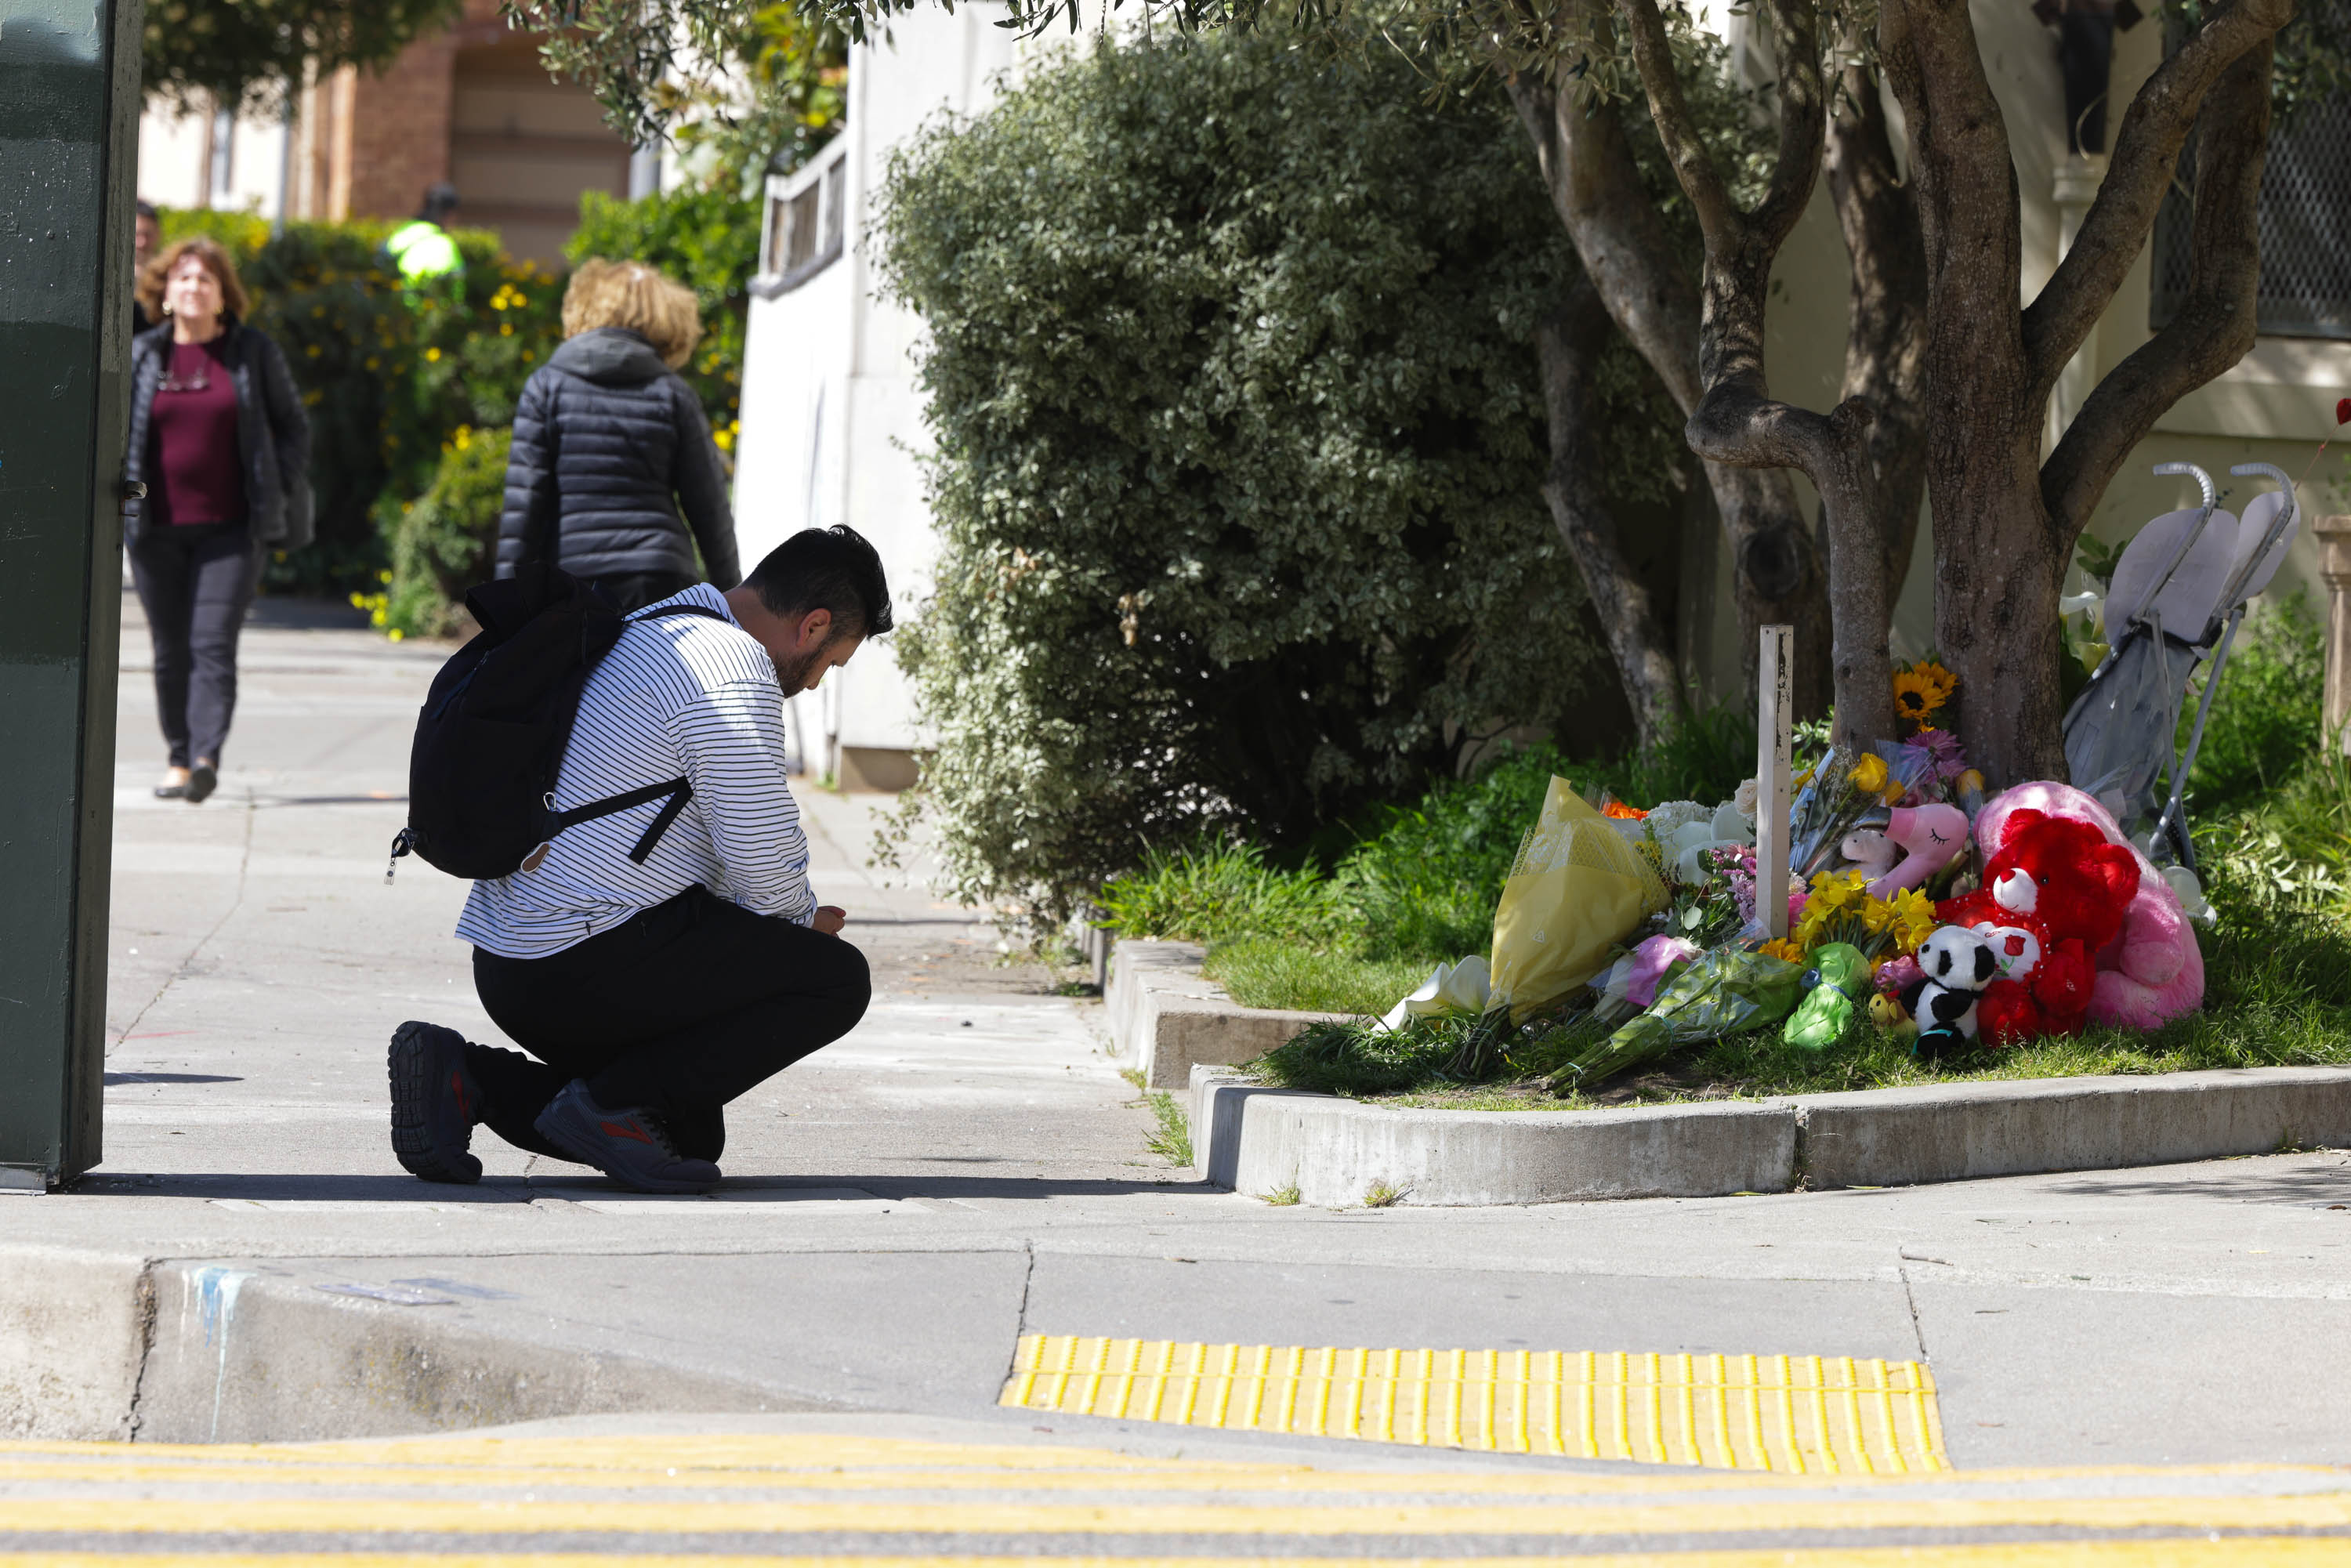 A person crouches by a sidewalk memorial with flowers and stuffed animals, as another person walks by in the background.